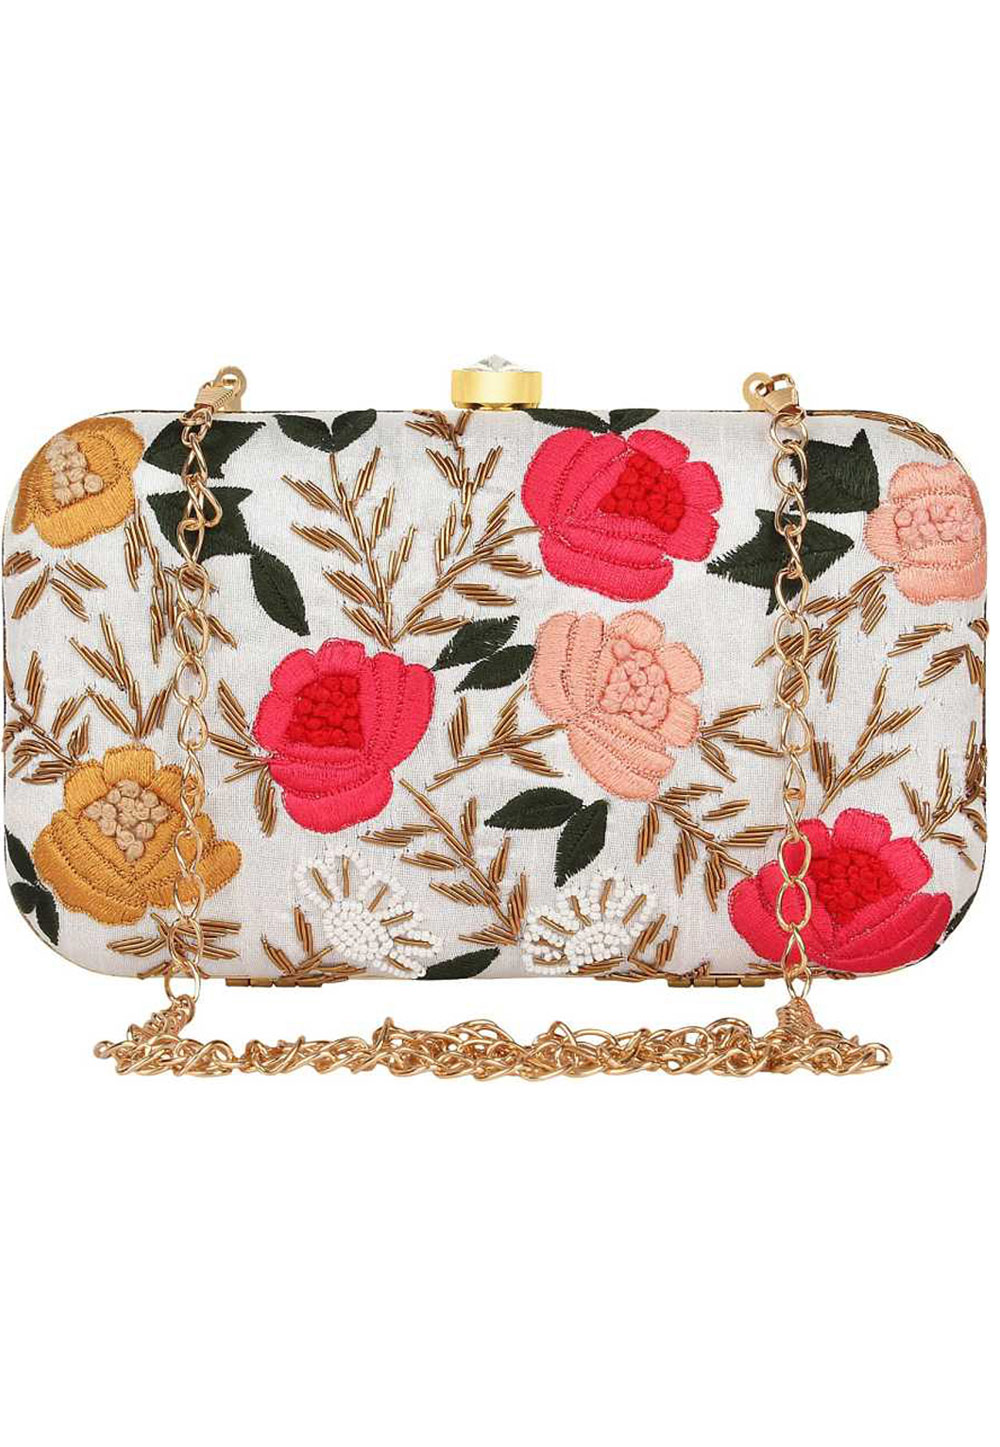 Off White Synthetic Embroidered Clutch 225837